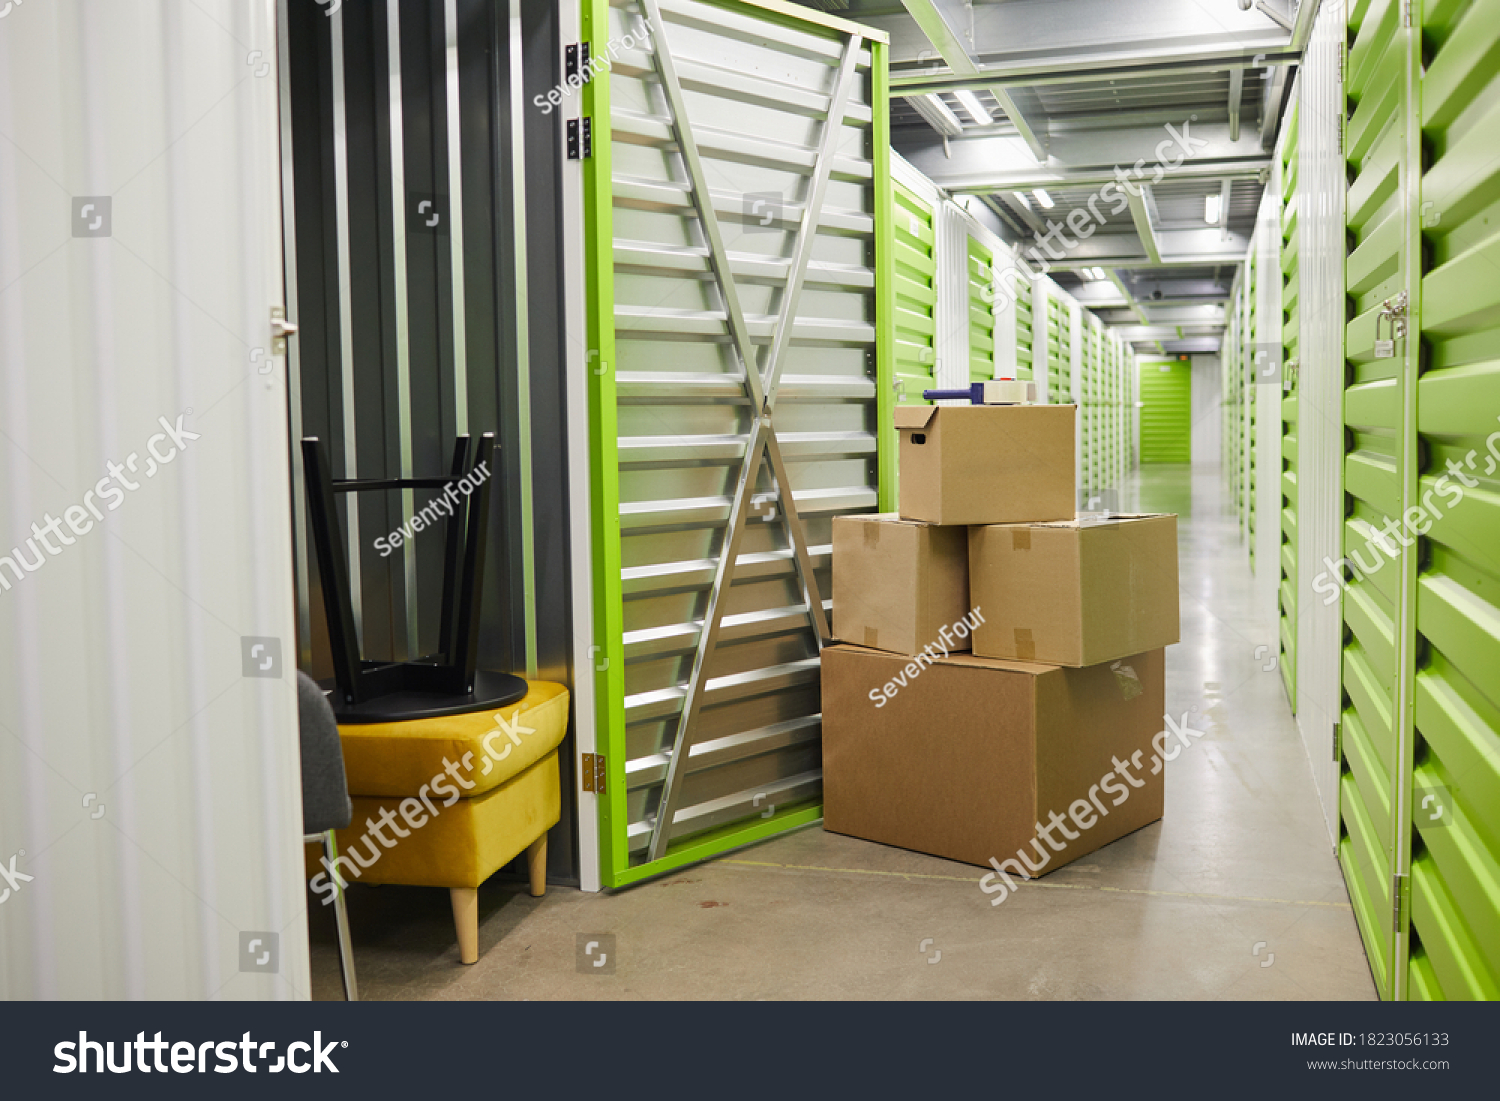 Background image of cardboard boxes stacked by open door of self storage unit, copy space #1823056133